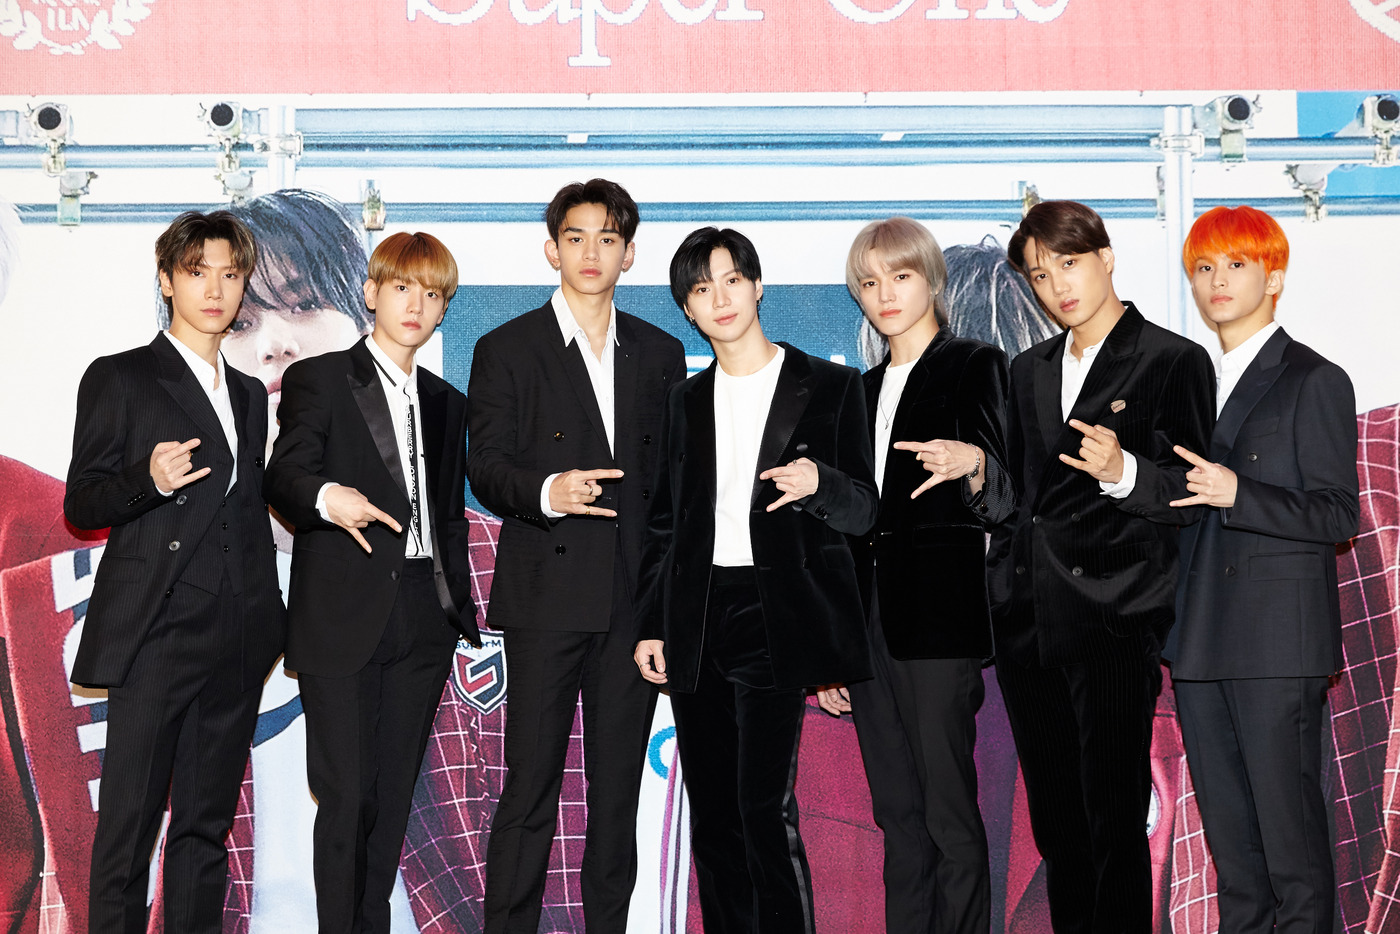 It is an album that shows the color of SuperM clearly, said Baekhyun, leader of SuperM. I hope many people will check the color of SuperM.Were having a lot of difficulties, but weve got a message to get through it together, member Kai said.Meanwhile, SuperMs album, which includes singles 100 and Tiger Inside released in August and September, contains 15 songs, including the title song One (Monster & Infinity).